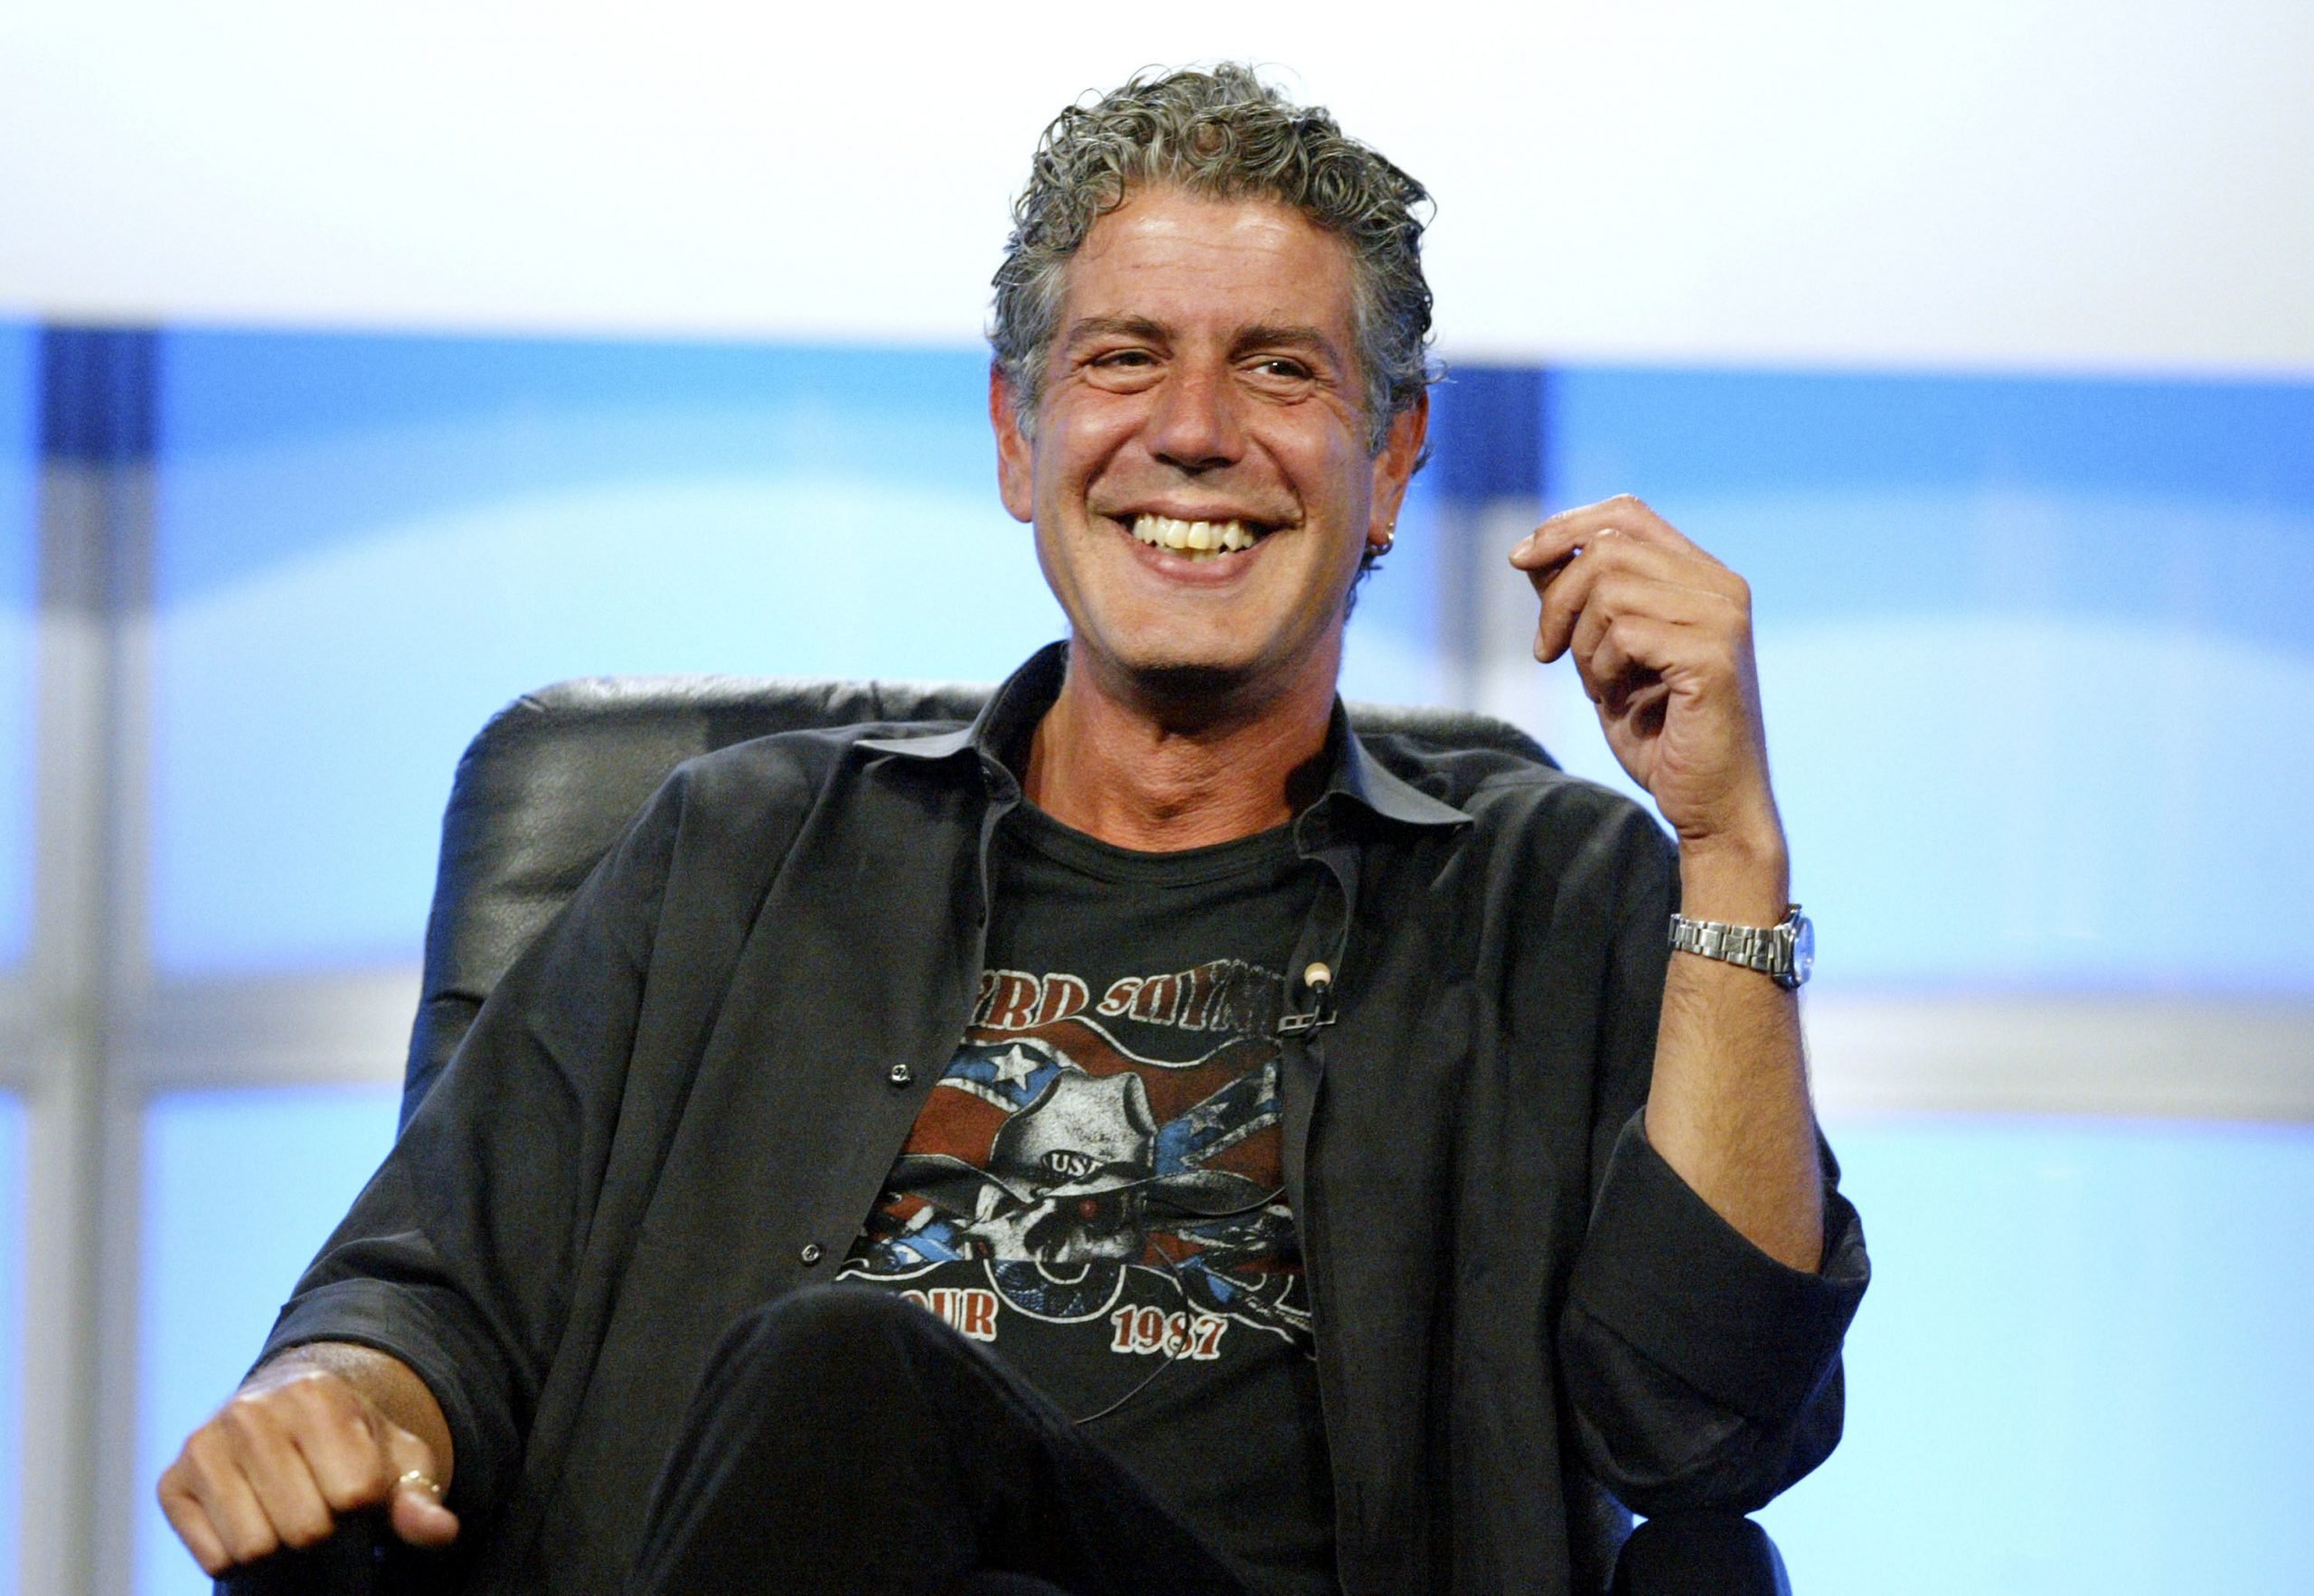 Late chef and author Anthony Bourdain